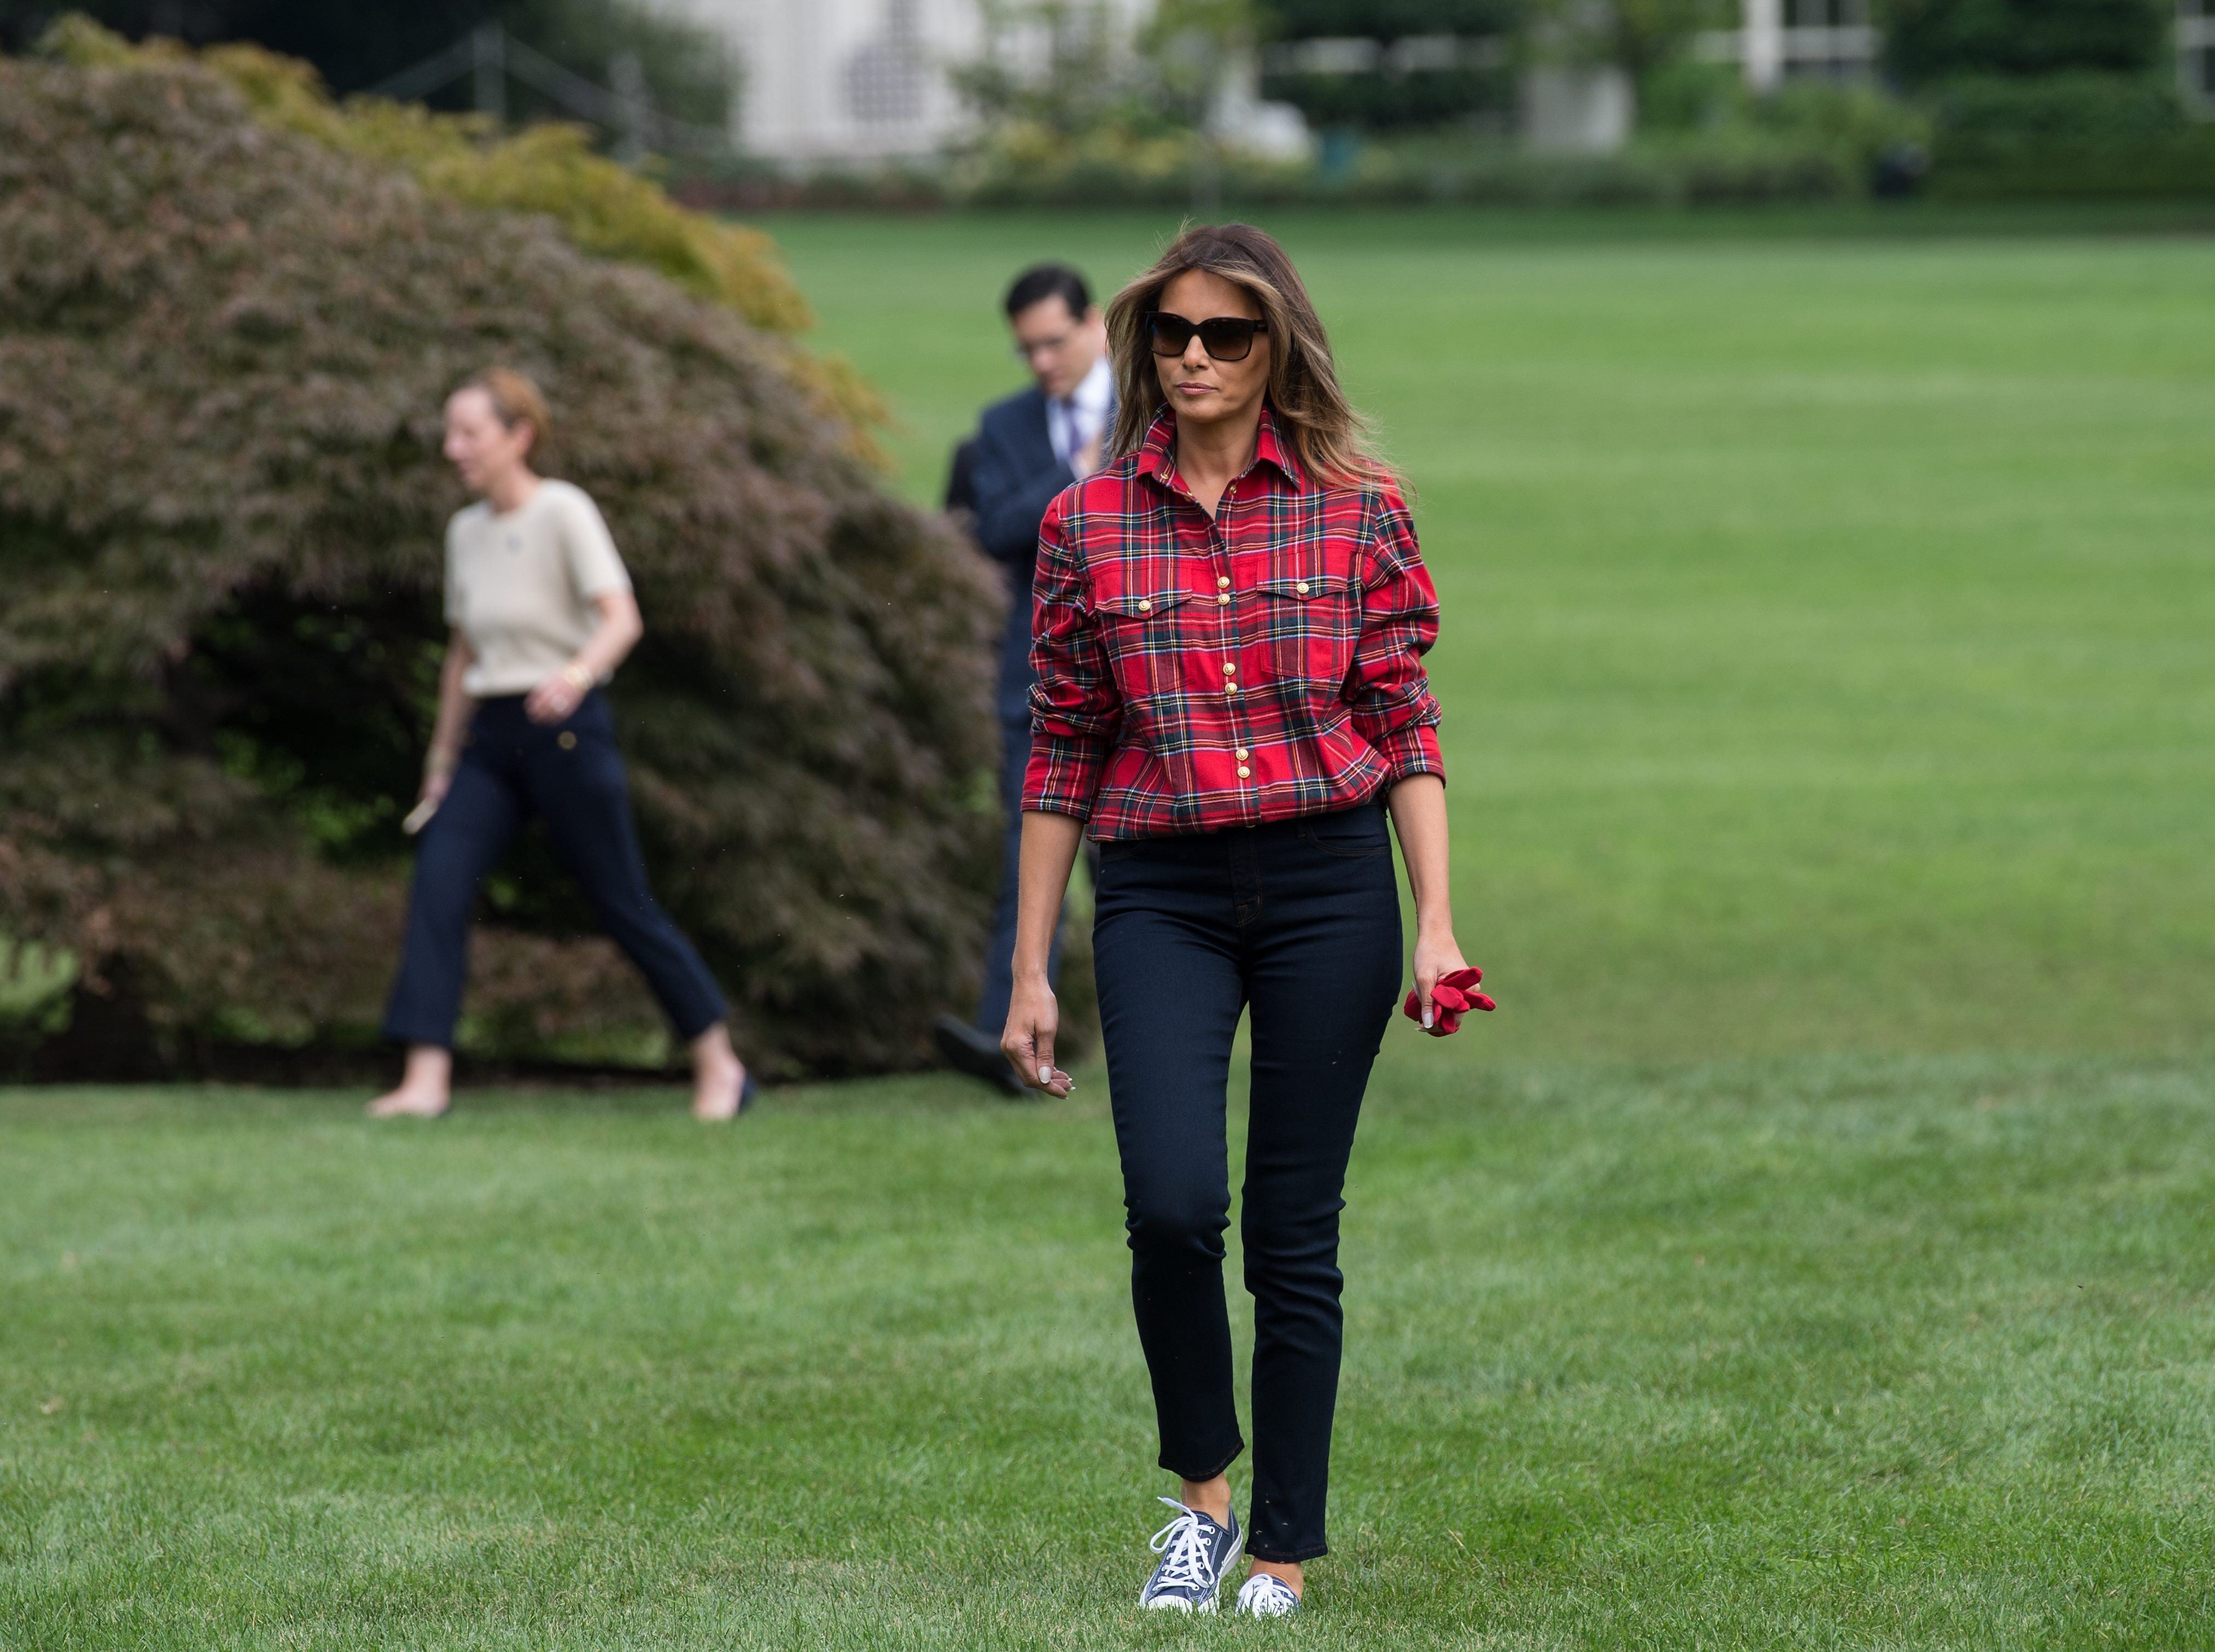 Melania Trump and More Celebrities Wearing Stan Smiths [PHOTOS